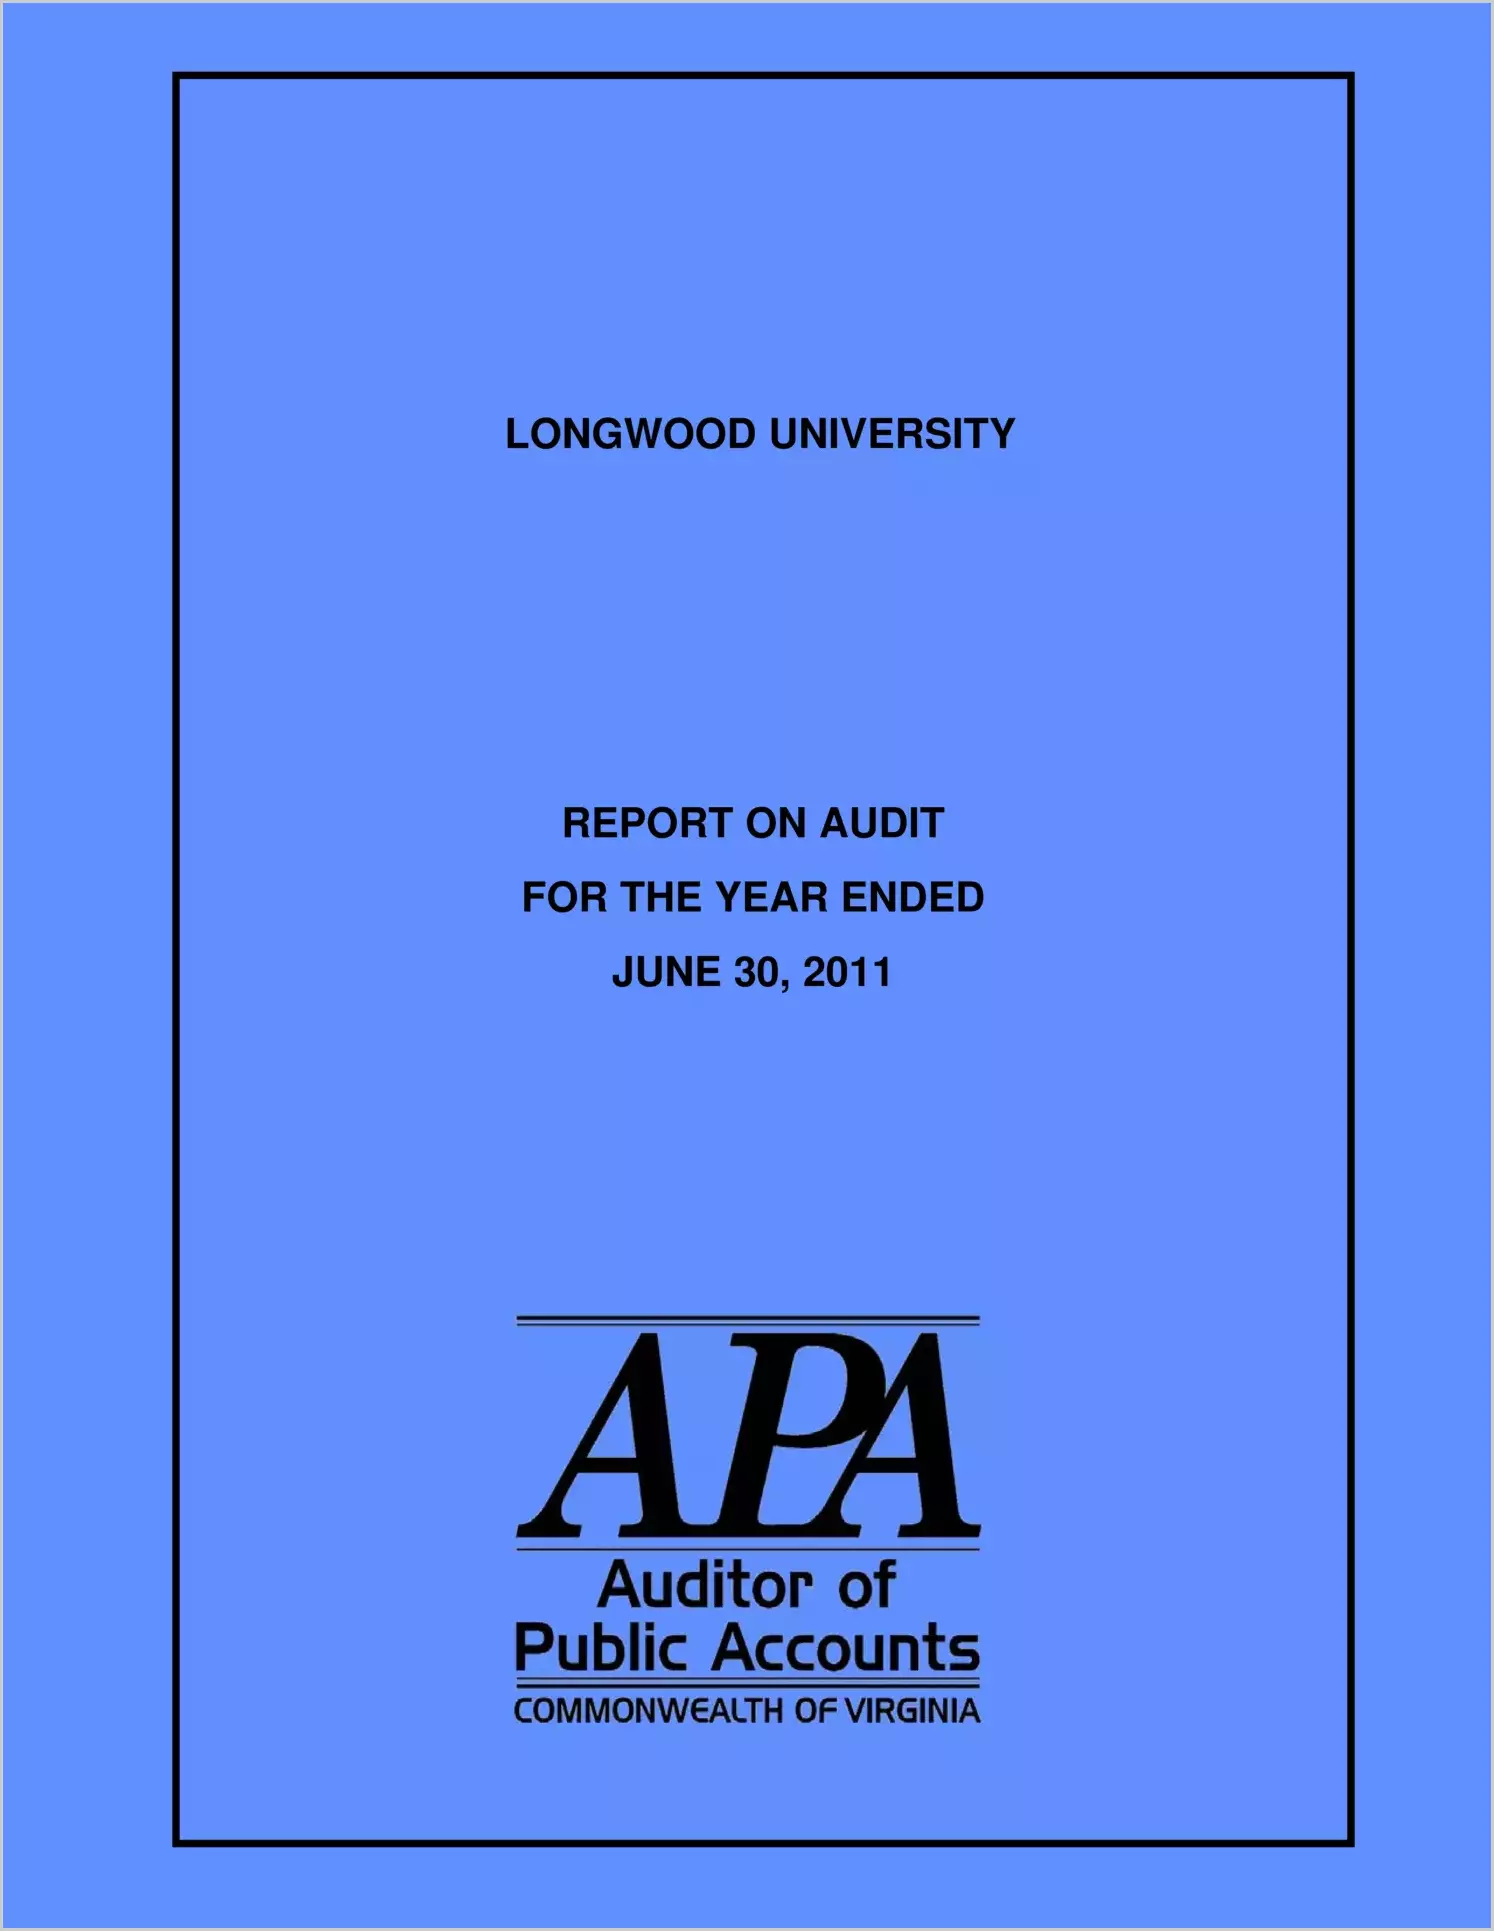 Longwood University report on audit for the year ended June 30, 2011